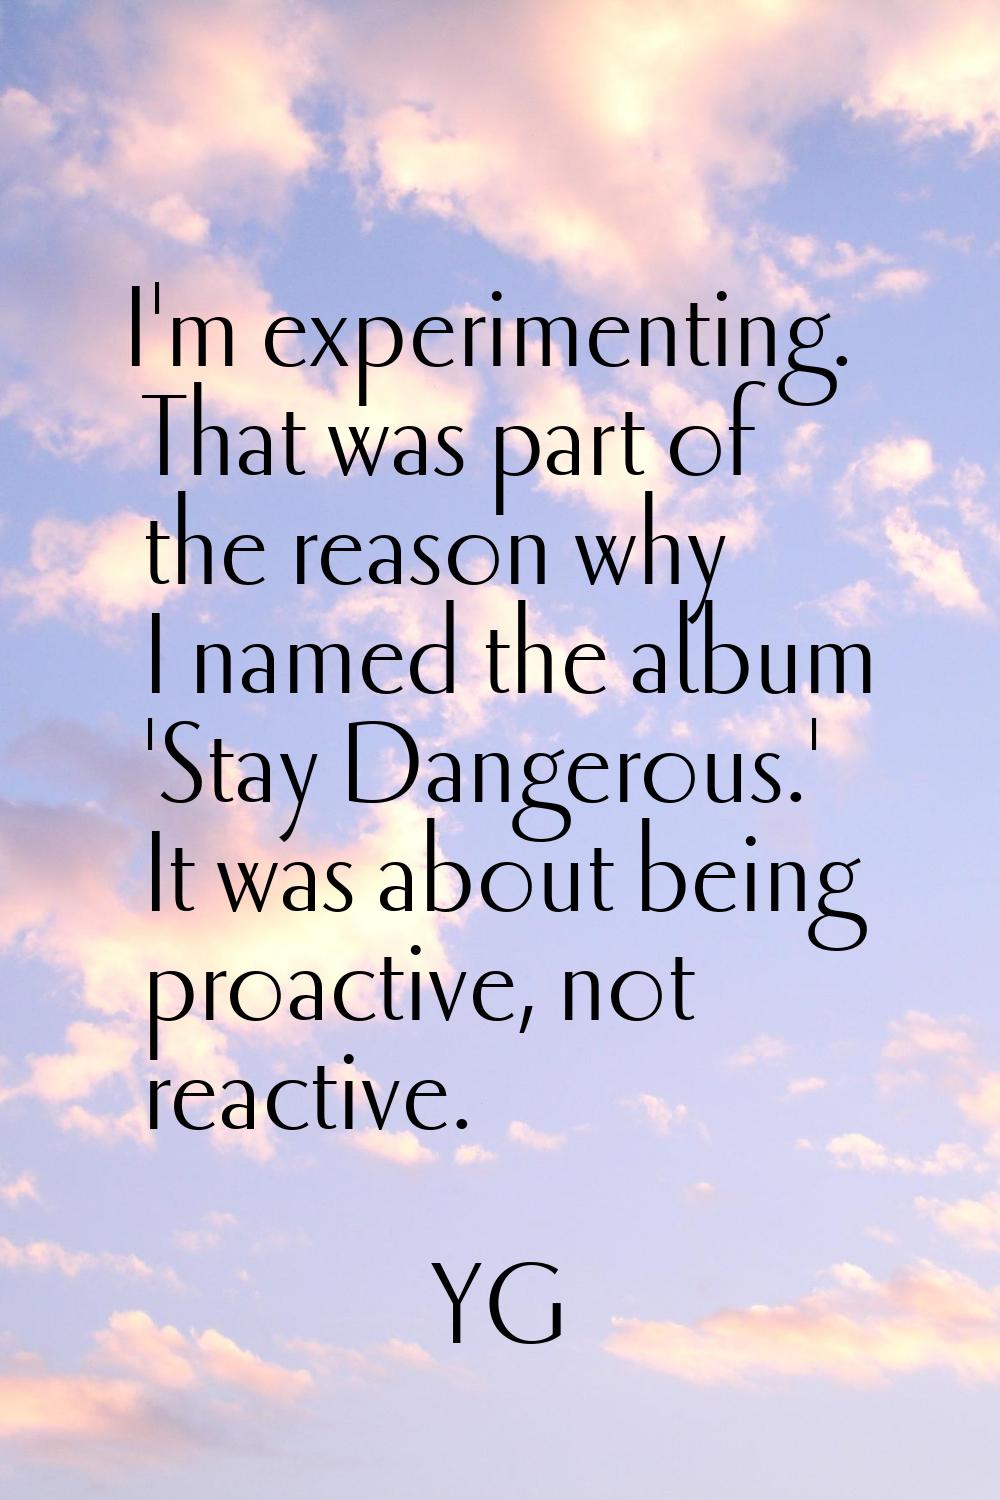 I'm experimenting. That was part of the reason why I named the album 'Stay Dangerous.' It was about